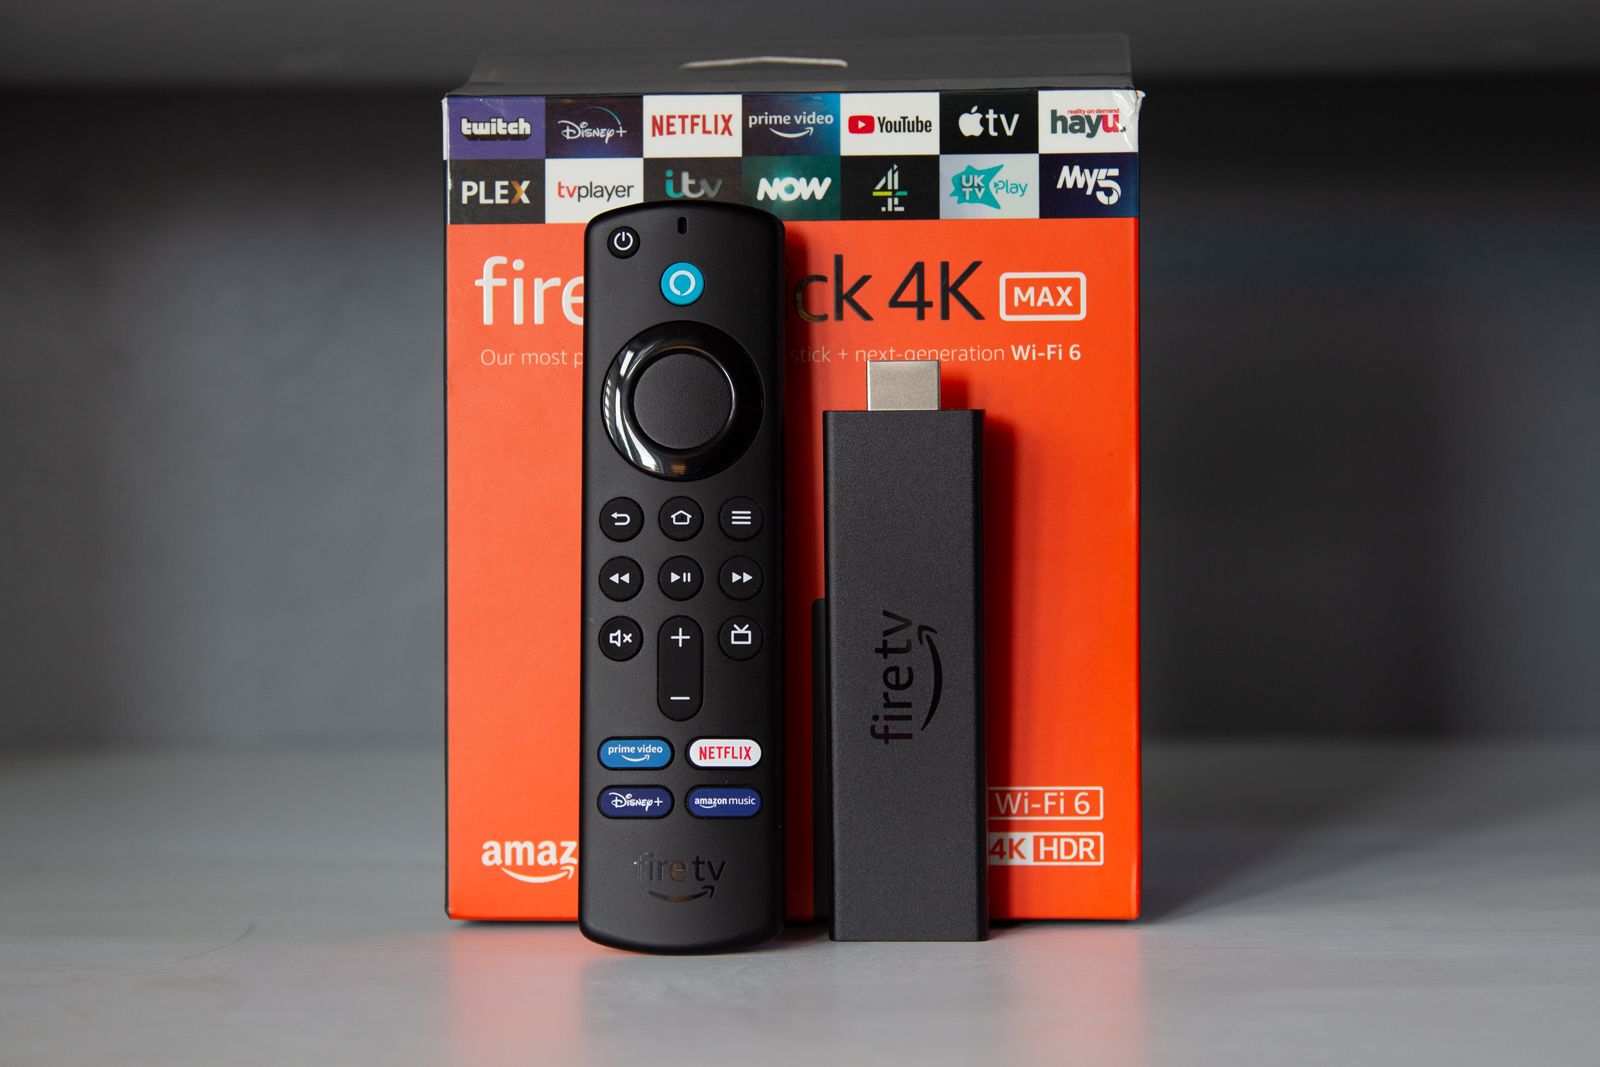 How to factory reset Amazon Fire TV